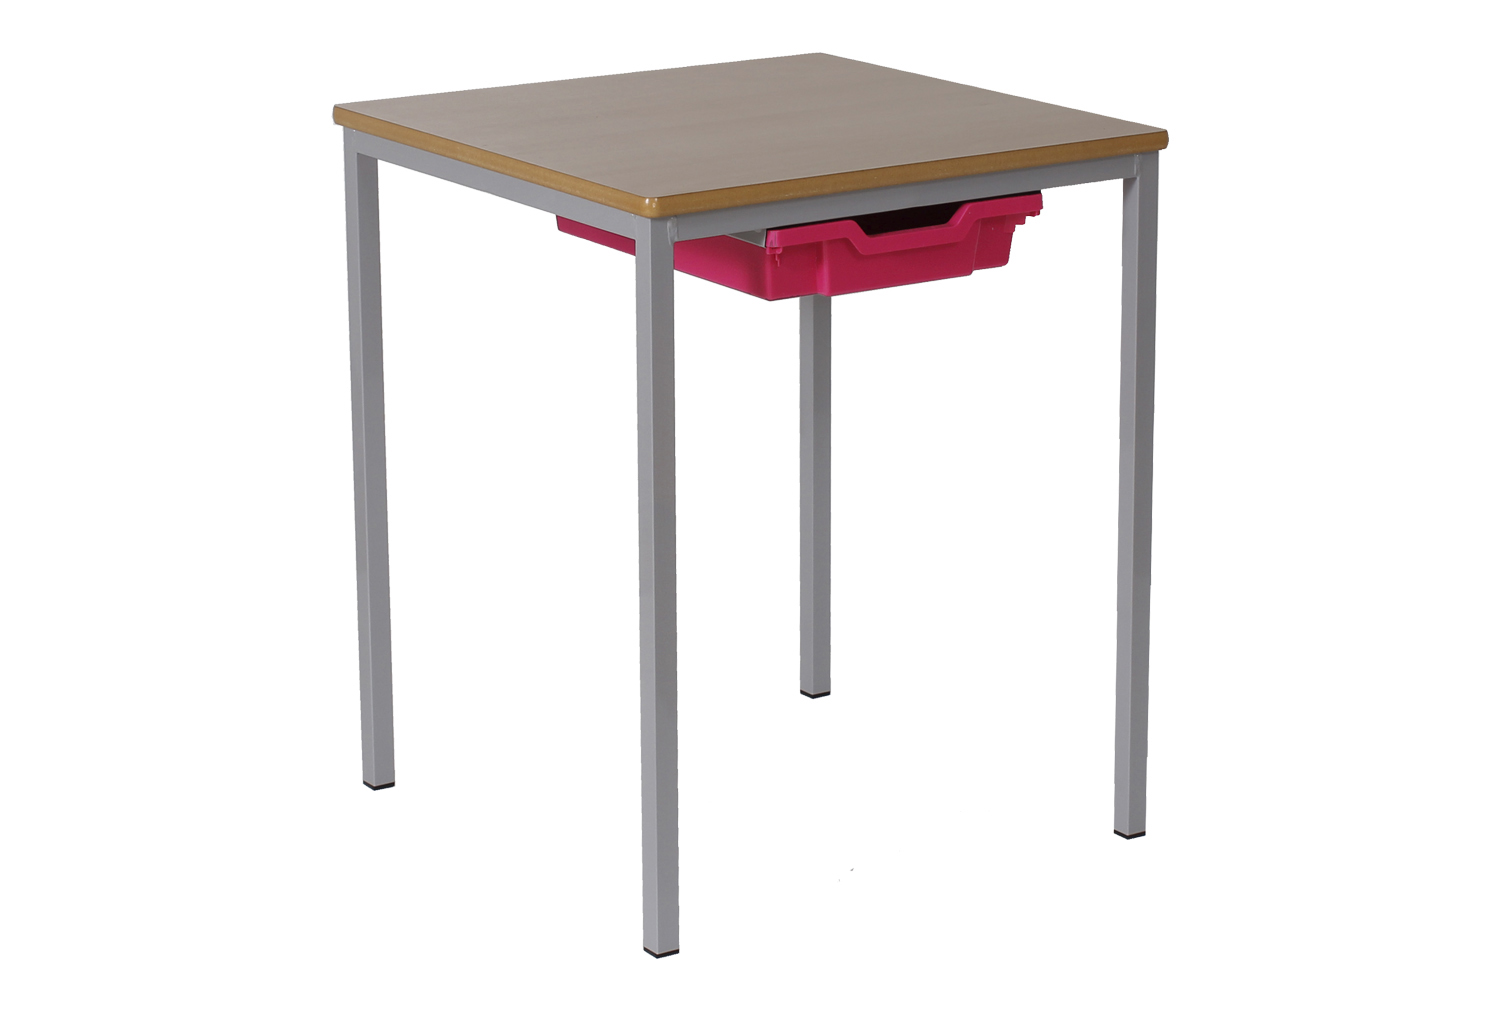 Qty 4 - Educate Student Square Table with Tray 4-5 Years (MDF Edge), Charcoal Frame, Beech Top, Red Trays